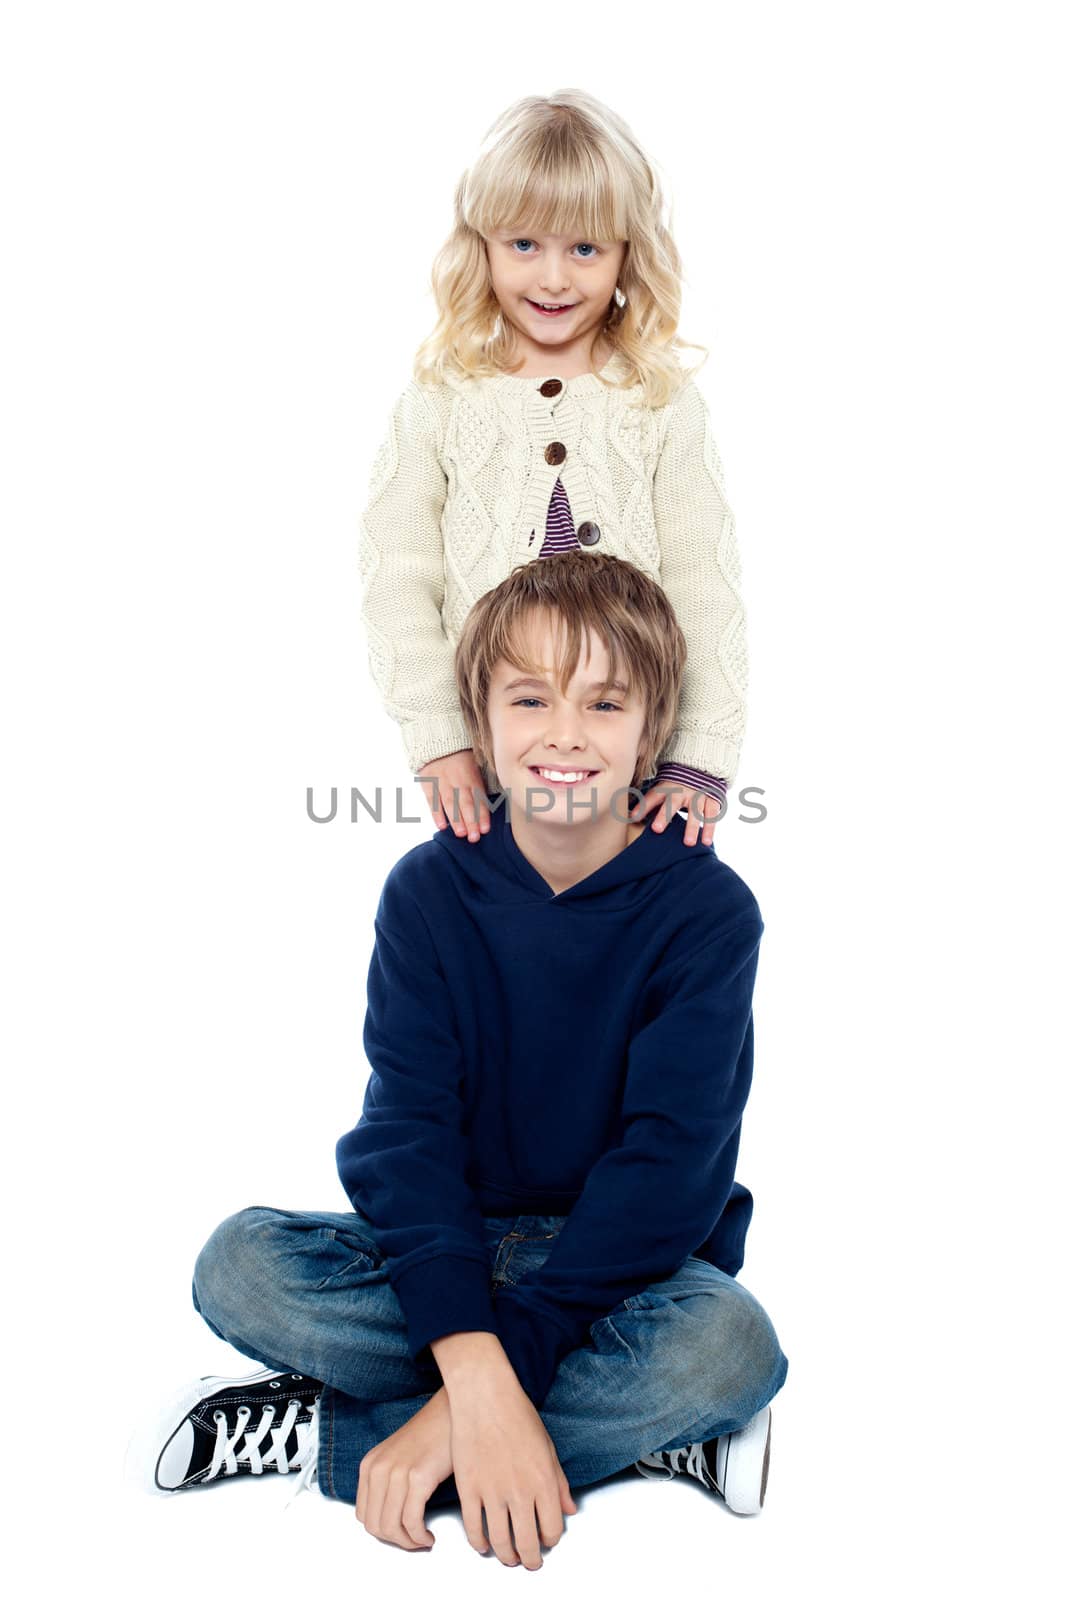 Affectionate brother and sister posing for a portrait by stockyimages